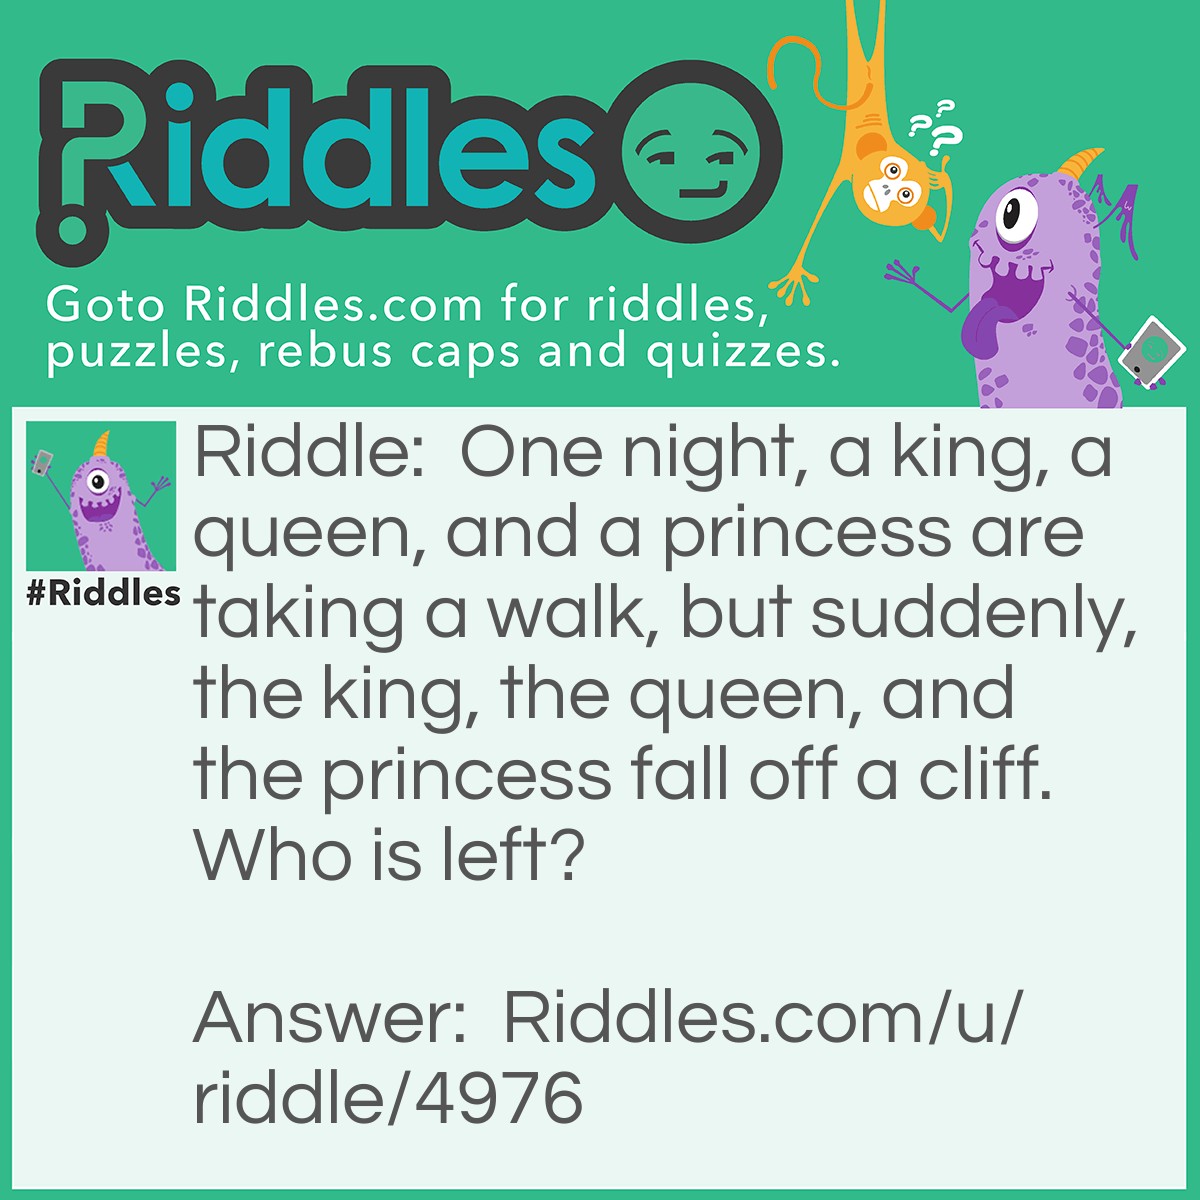 Riddle: One night, a king, a queen, and a princess are taking a walk, but suddenly, the king, the queen, and the princess fall off a cliff. Who is left? Answer: The Knight (NIGHT/KNIGHT) This riddle works better when said instead of red.